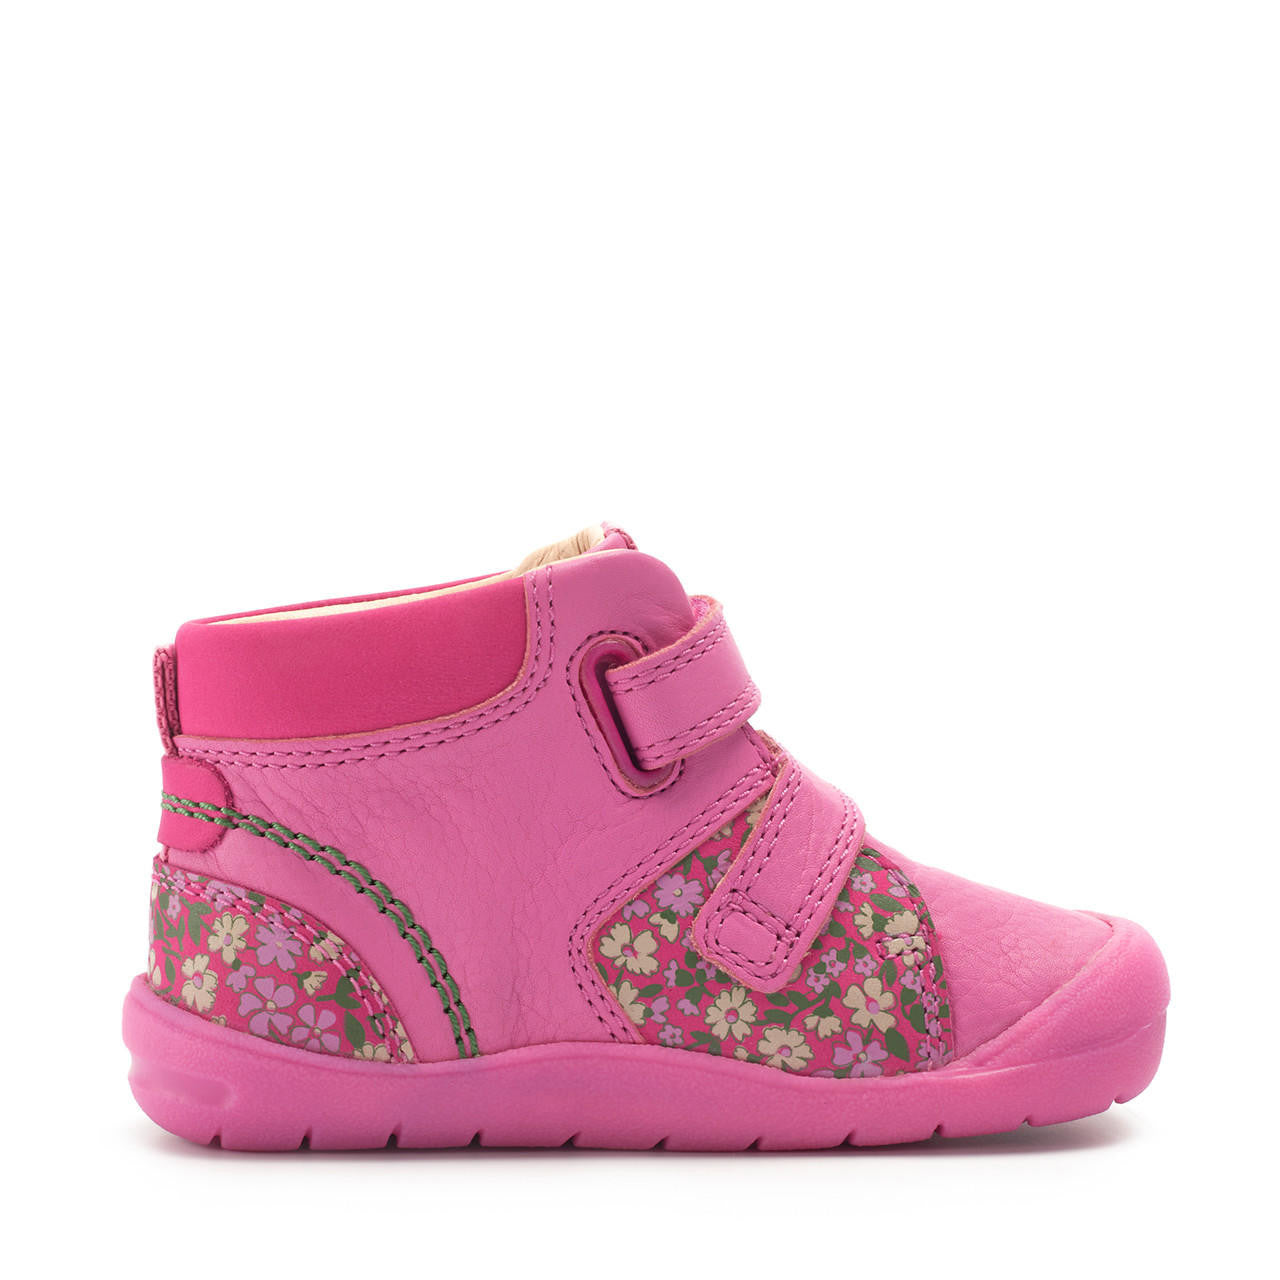 A girls boot by Start Rite and JoJo Maman Bebé collaboration, style Play Date  in Pink Leather and Floral Nubuck, with double velcro fastening and padded ankle. Left view.